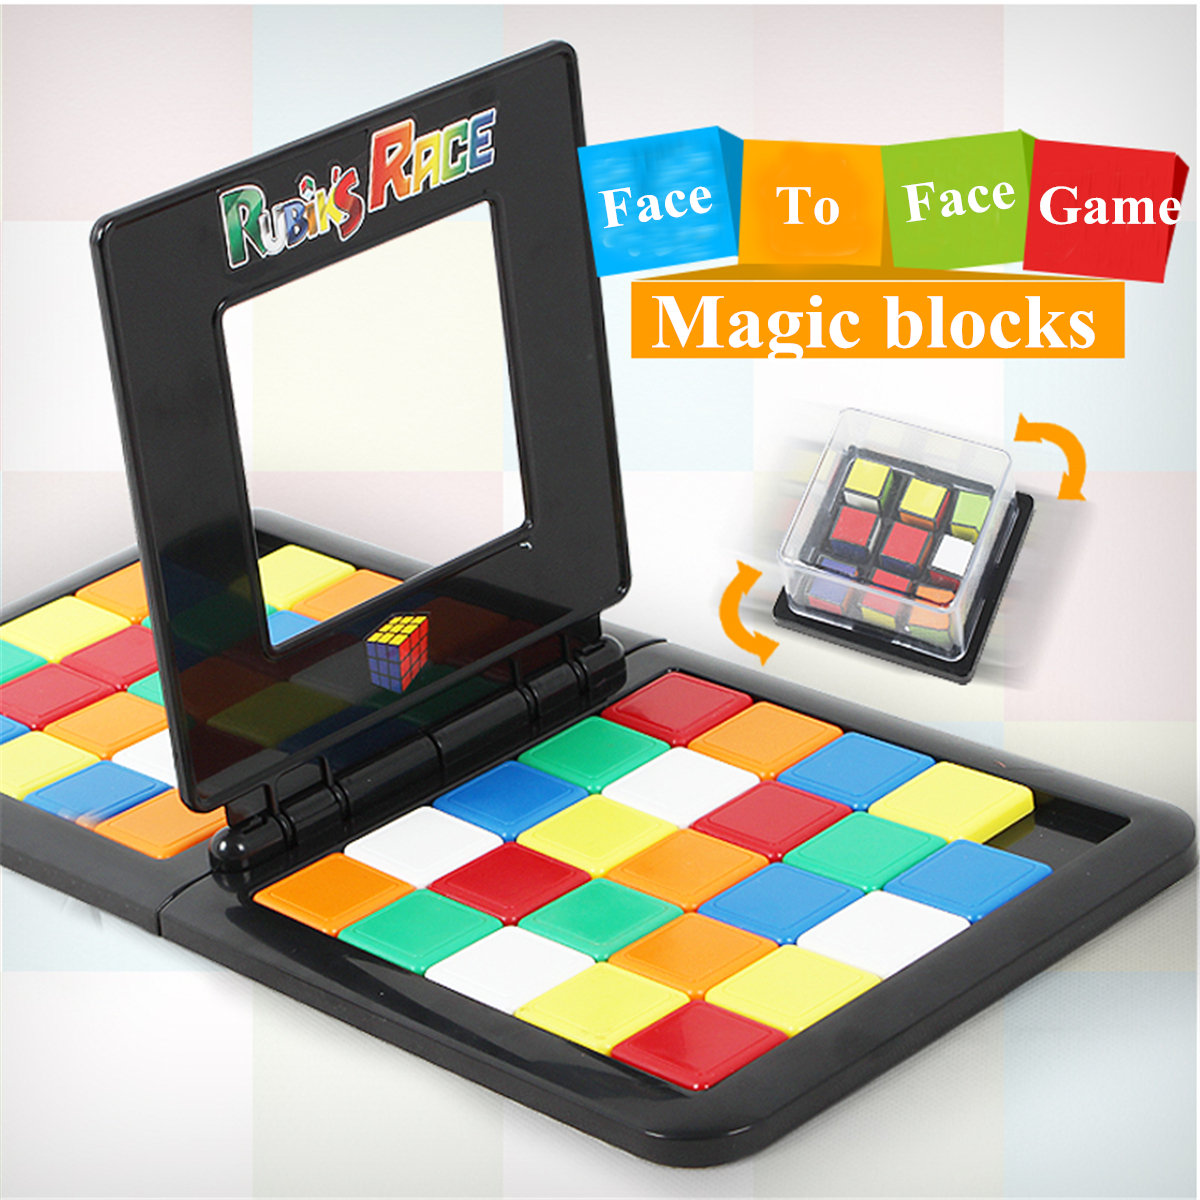 

Race Board Game Ultimate Face To Face Strategy Puzzle Toy Kids Child, Black/red/green black/red/blue